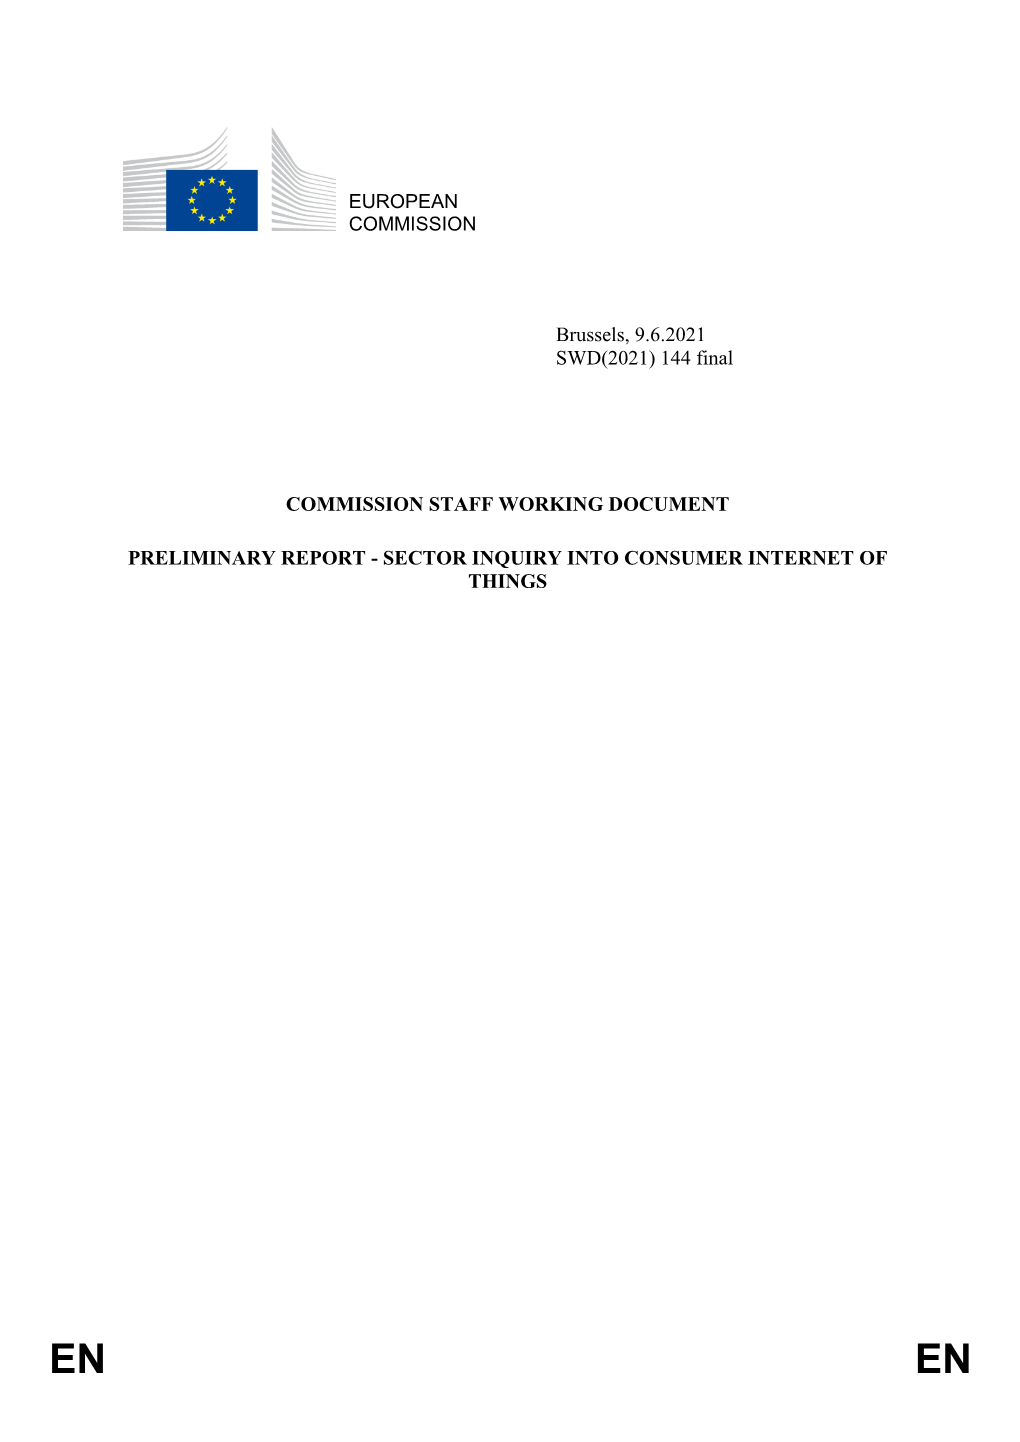 Preliminary Report - Sector Inquiry Into Consumer Internet of Things